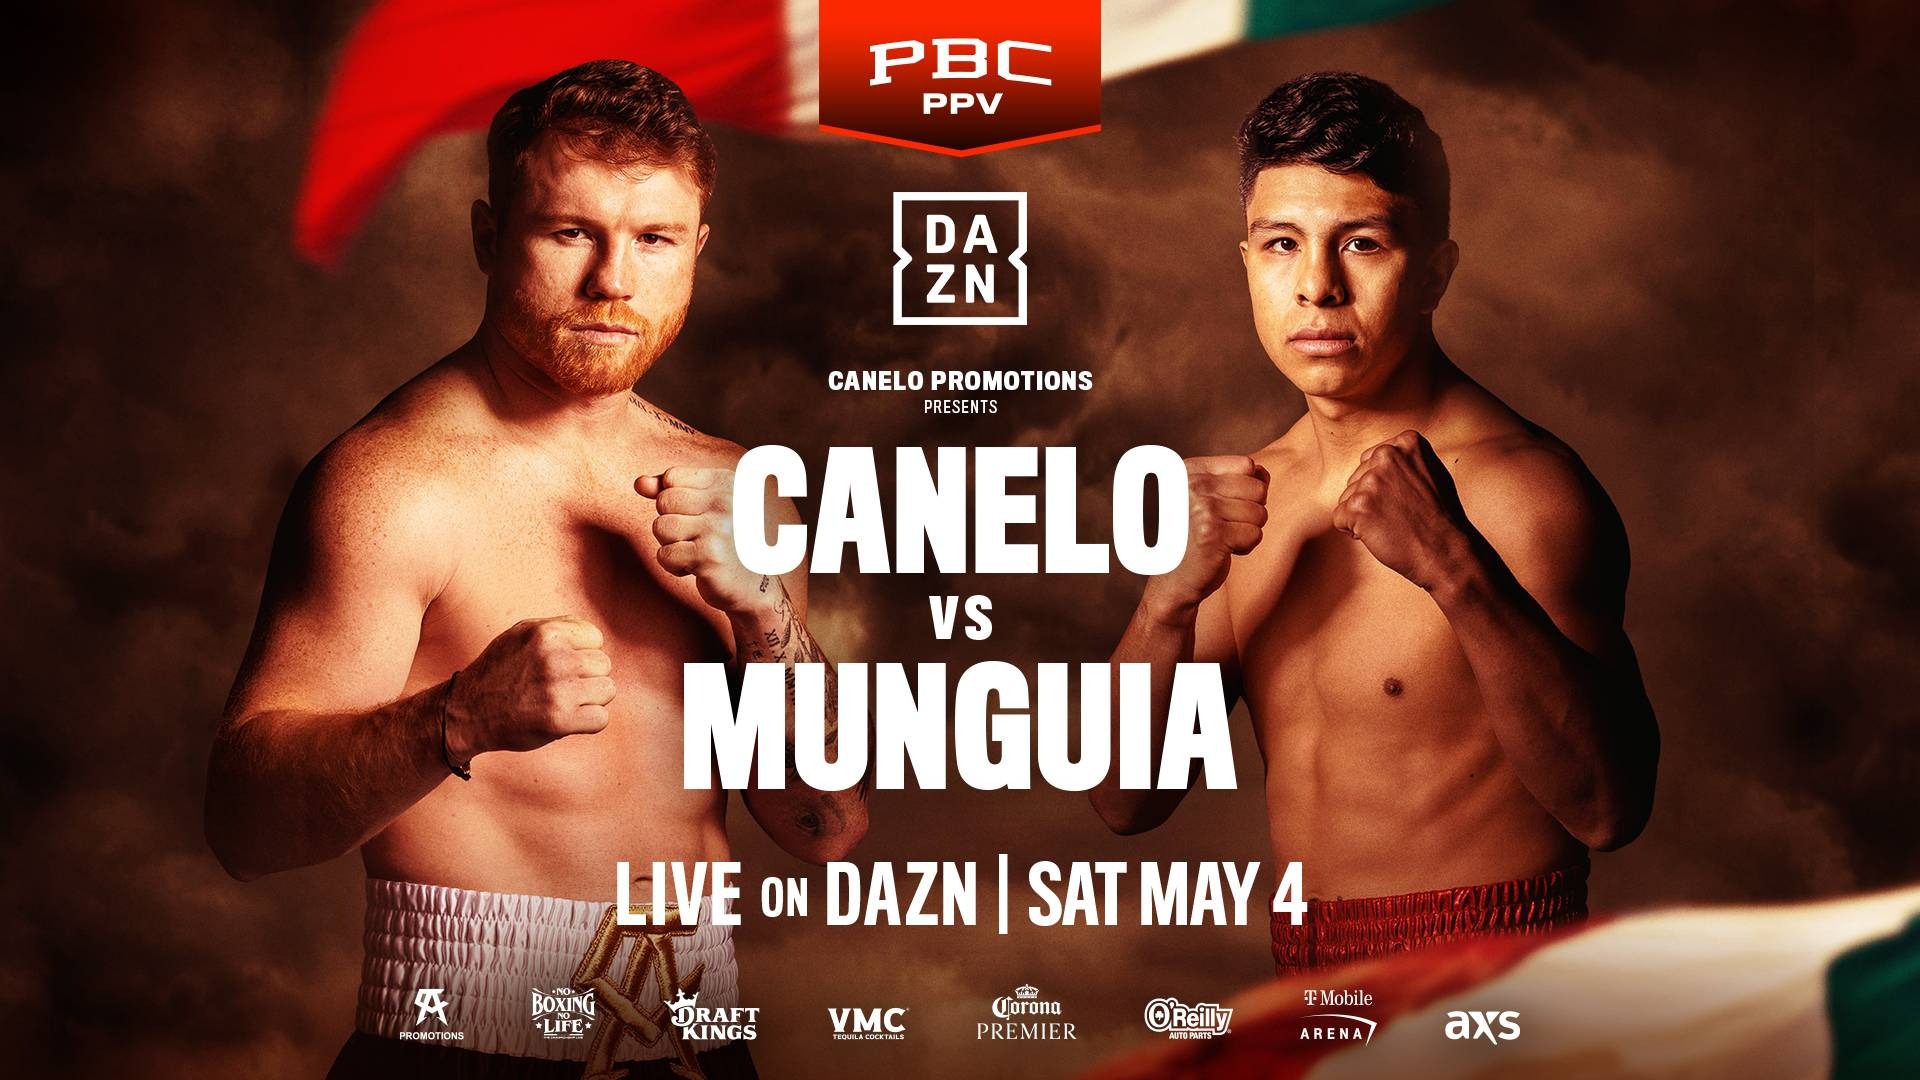 Watch Canelo vs Munguia live stream: Date, time, PPV price, undercard